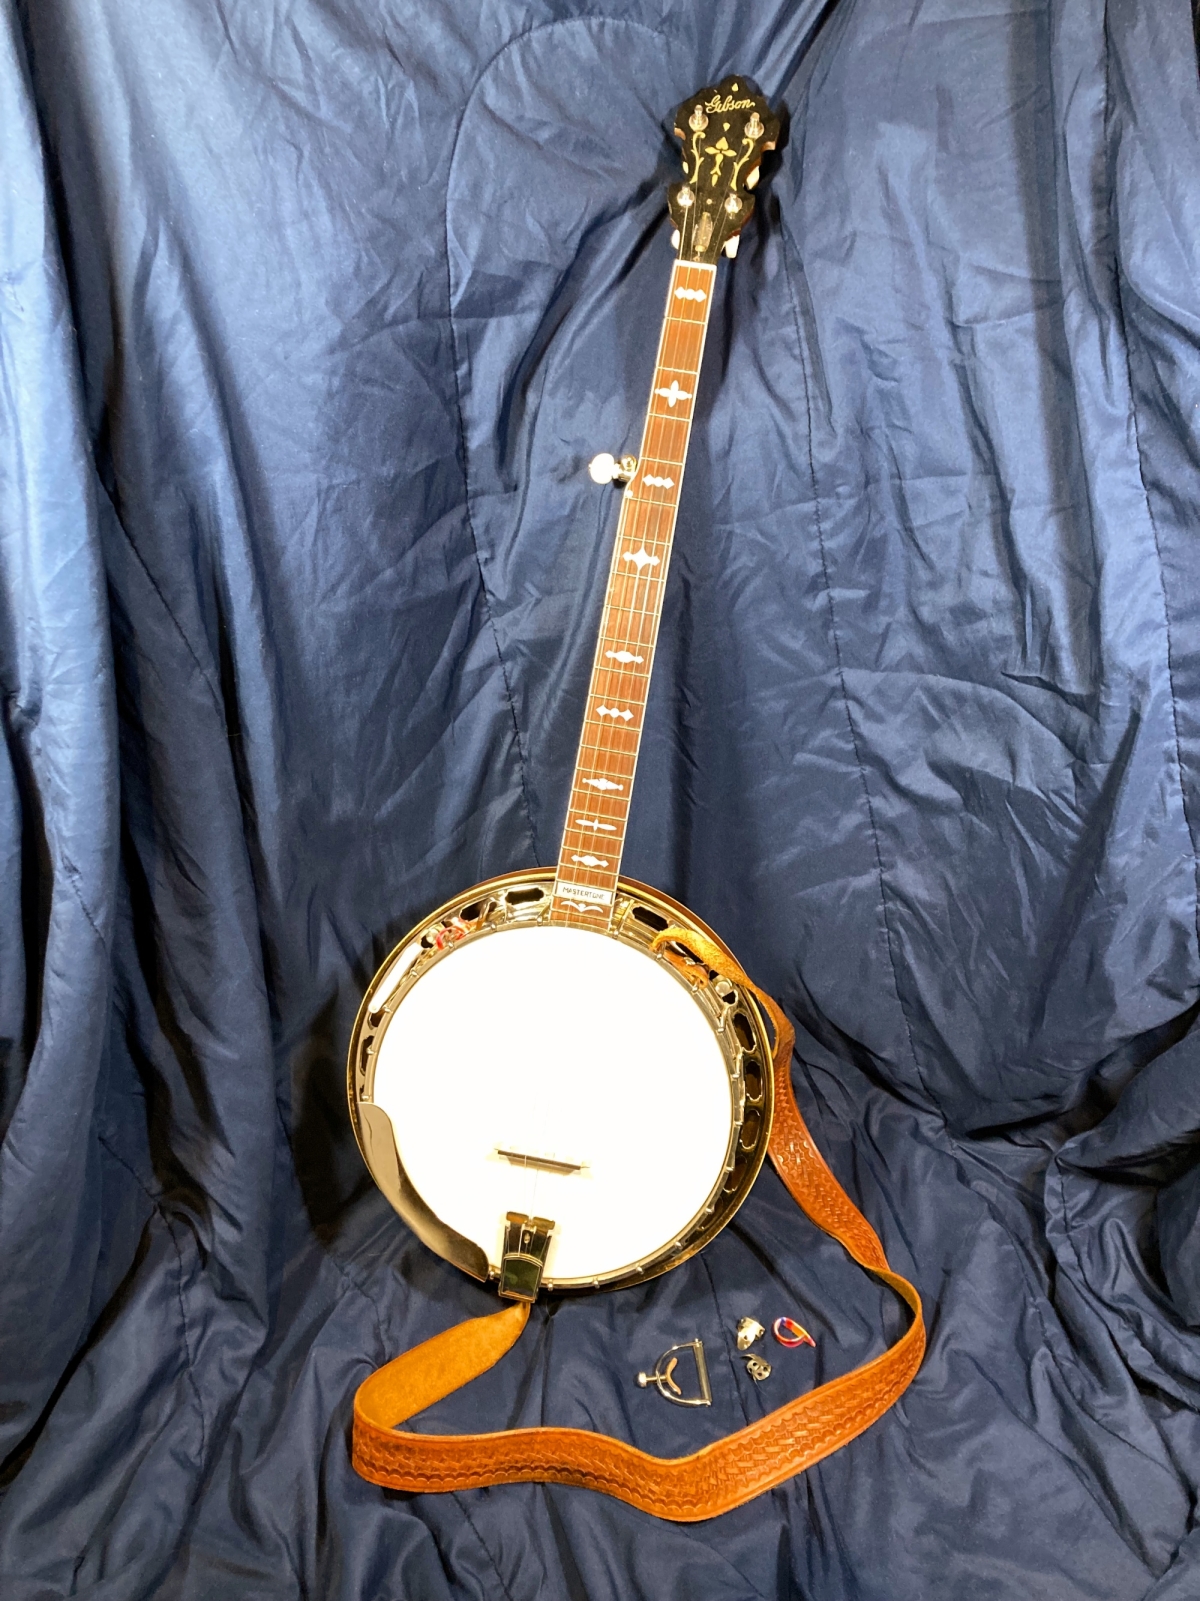 A Gibson banjo leaning against a silky blue background